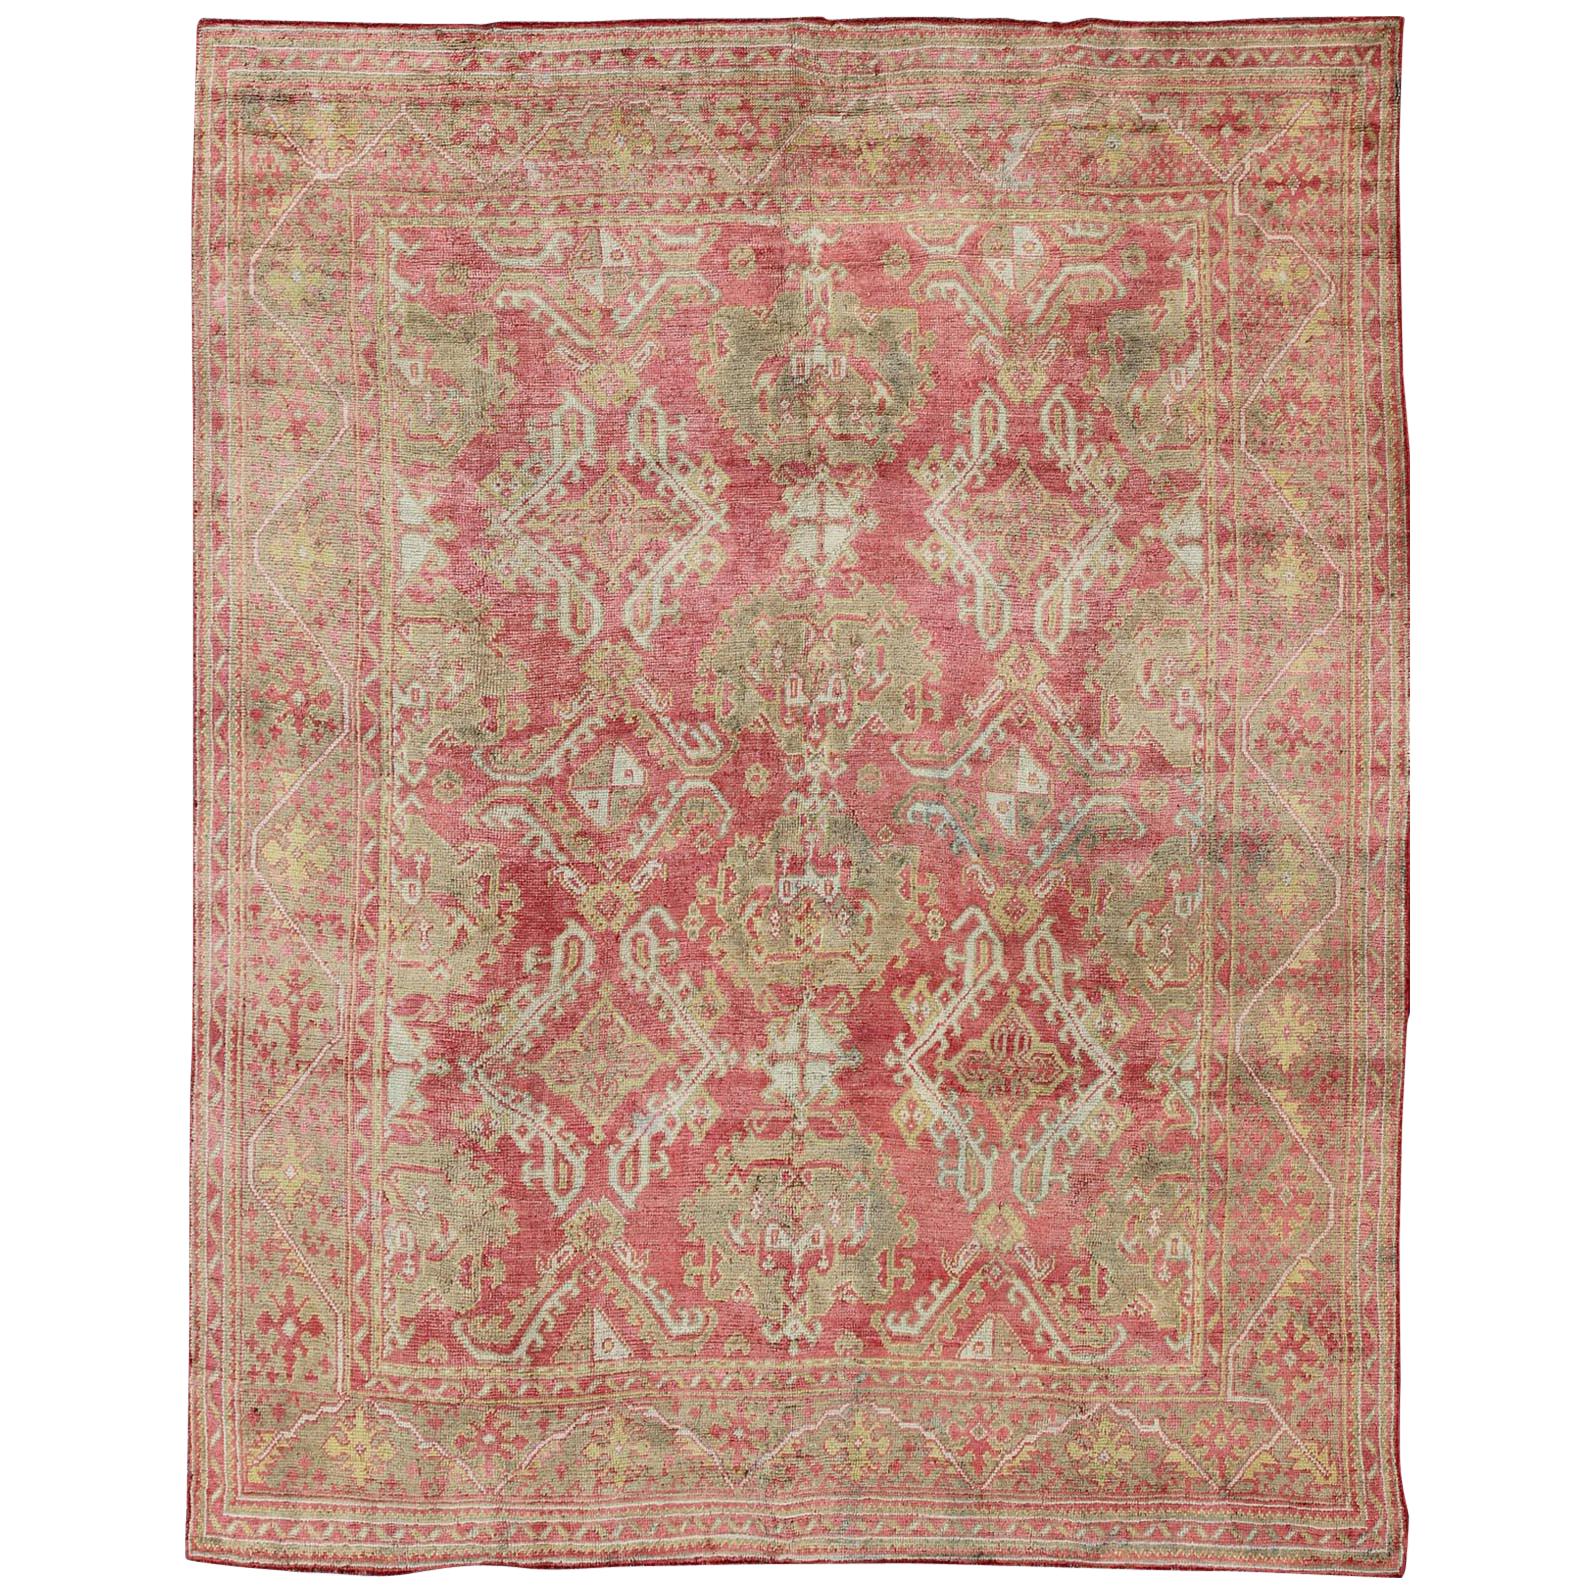 Antique Turkish Oushak Rug with Flowing Diamond and Geometric Design